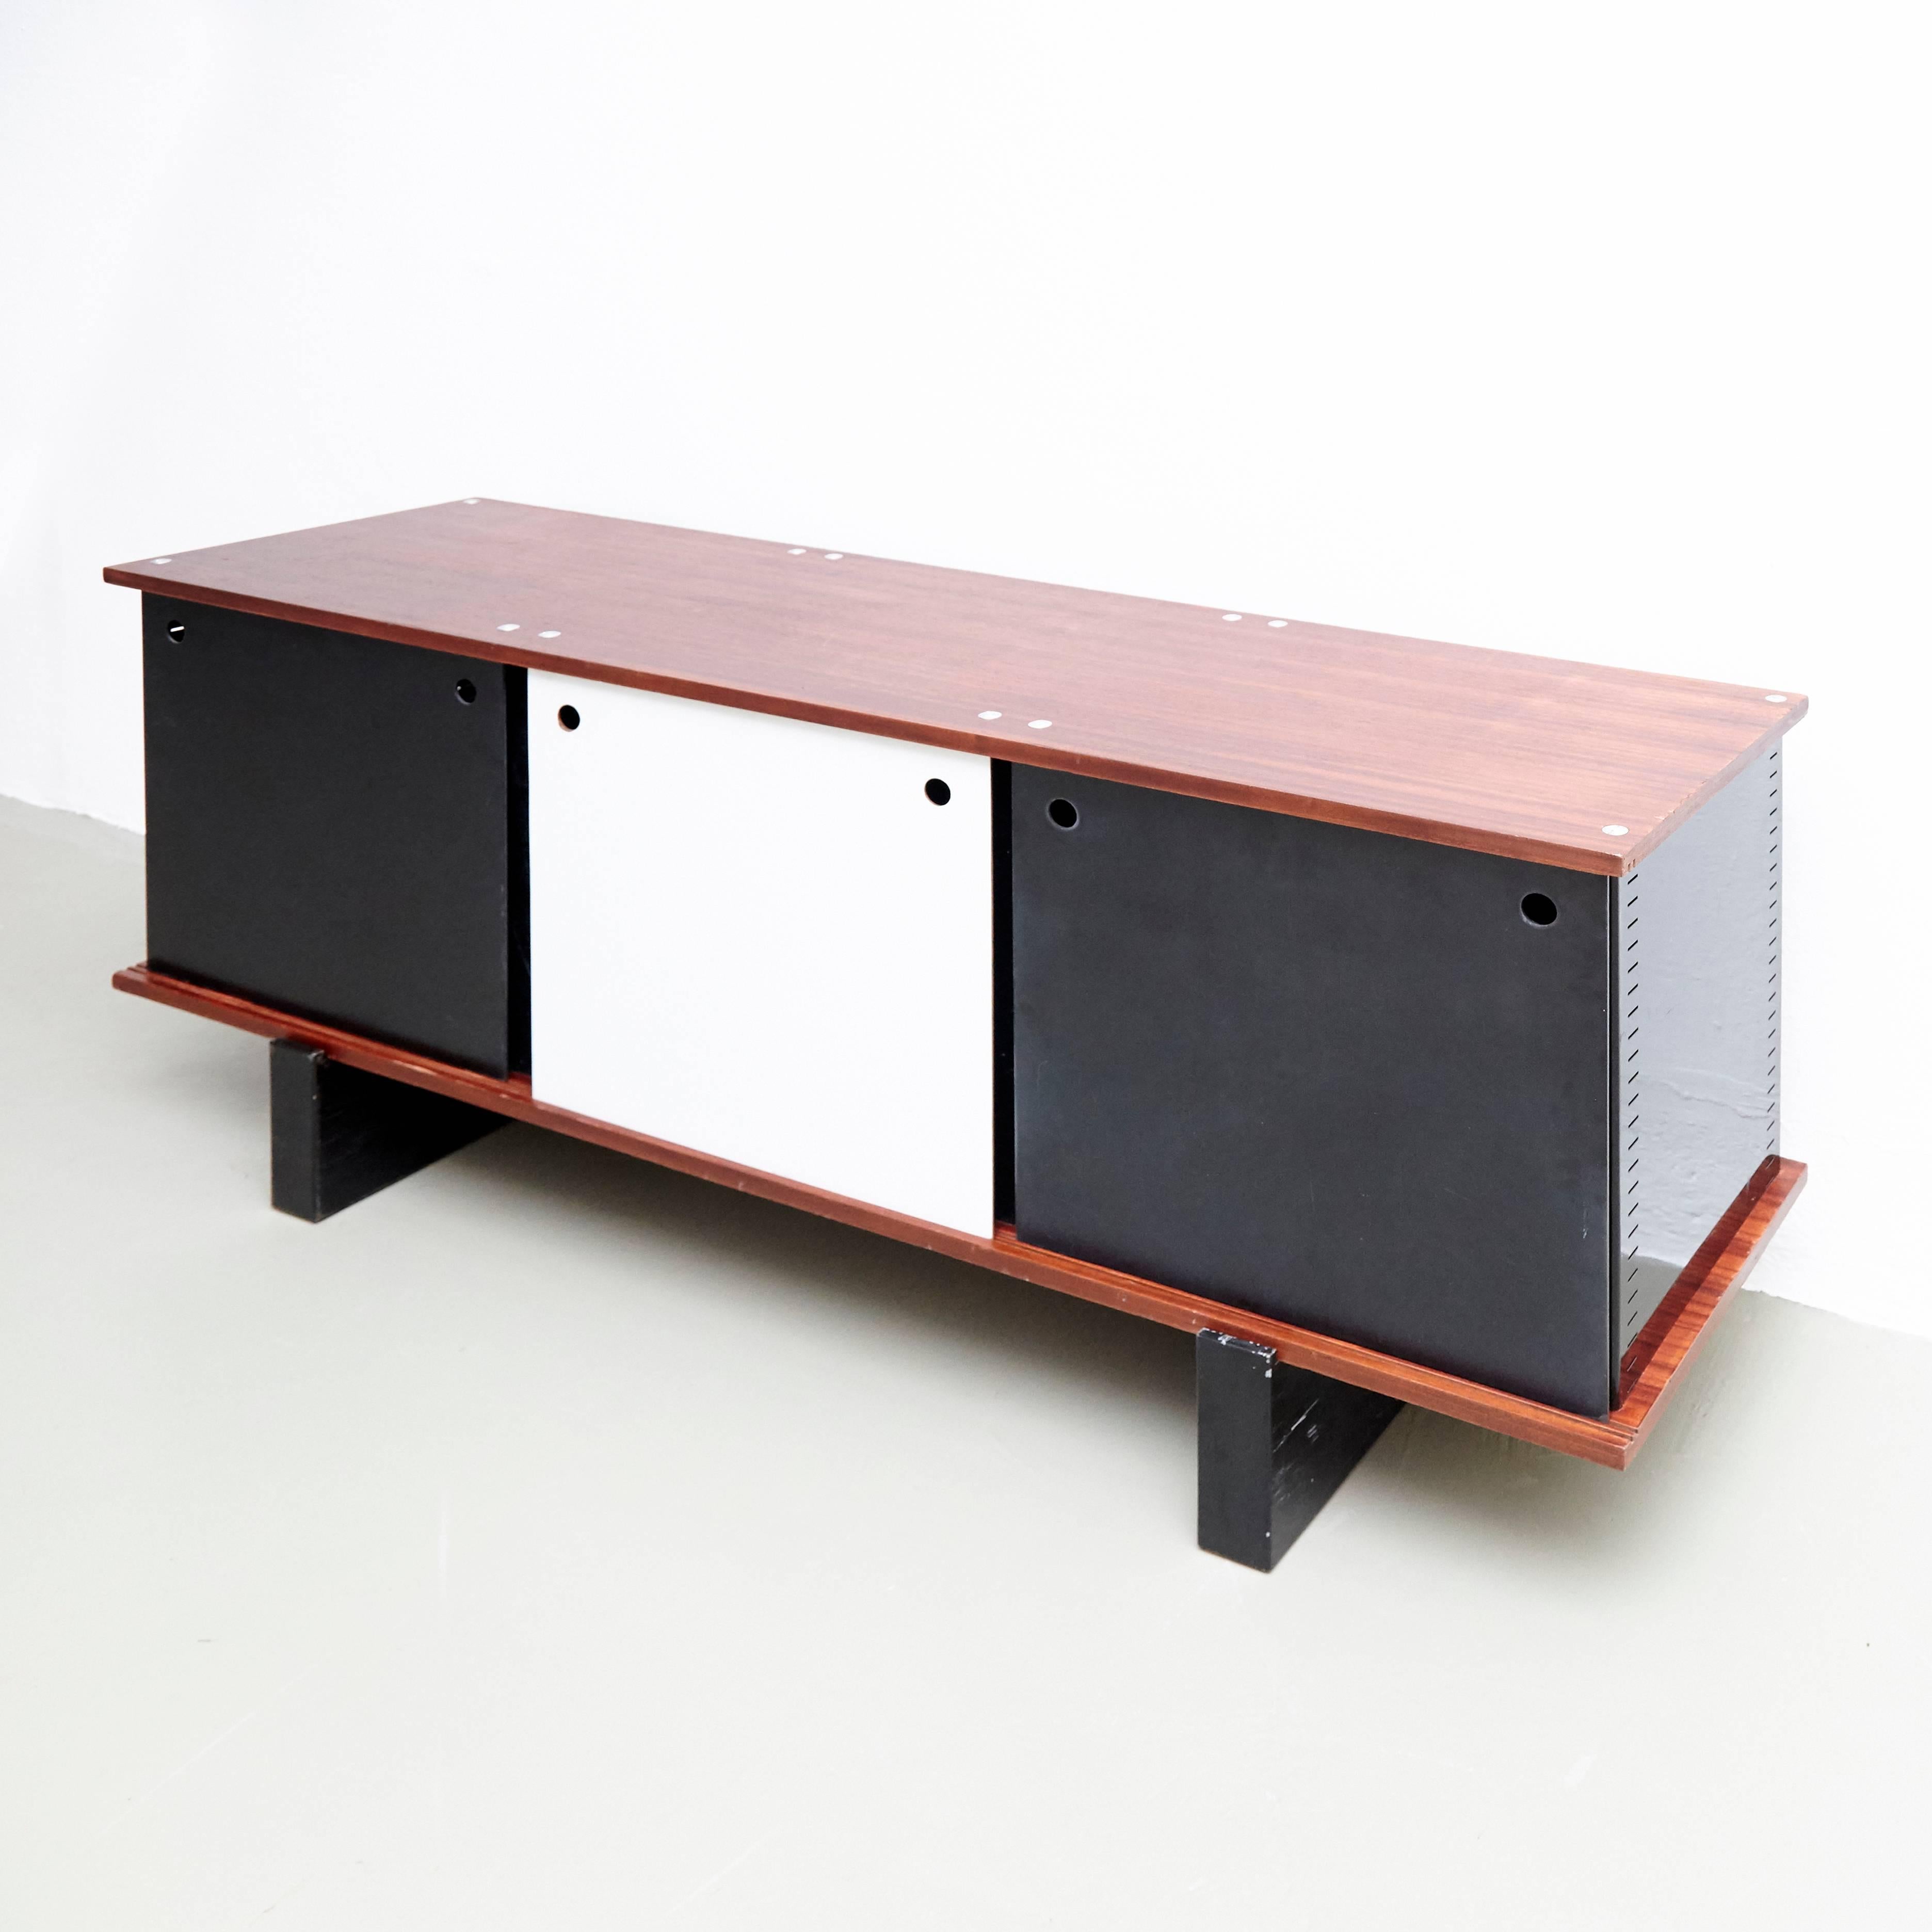 Three doors sideboard designed by Charlotte Perriand for Cité Cansado, circa 1950.

Edited by Galerie Steph Simon.
Provenance: Cansado, Mauritania (Africa).

In good original condition, with minor wear consistent with age and use, preserving a